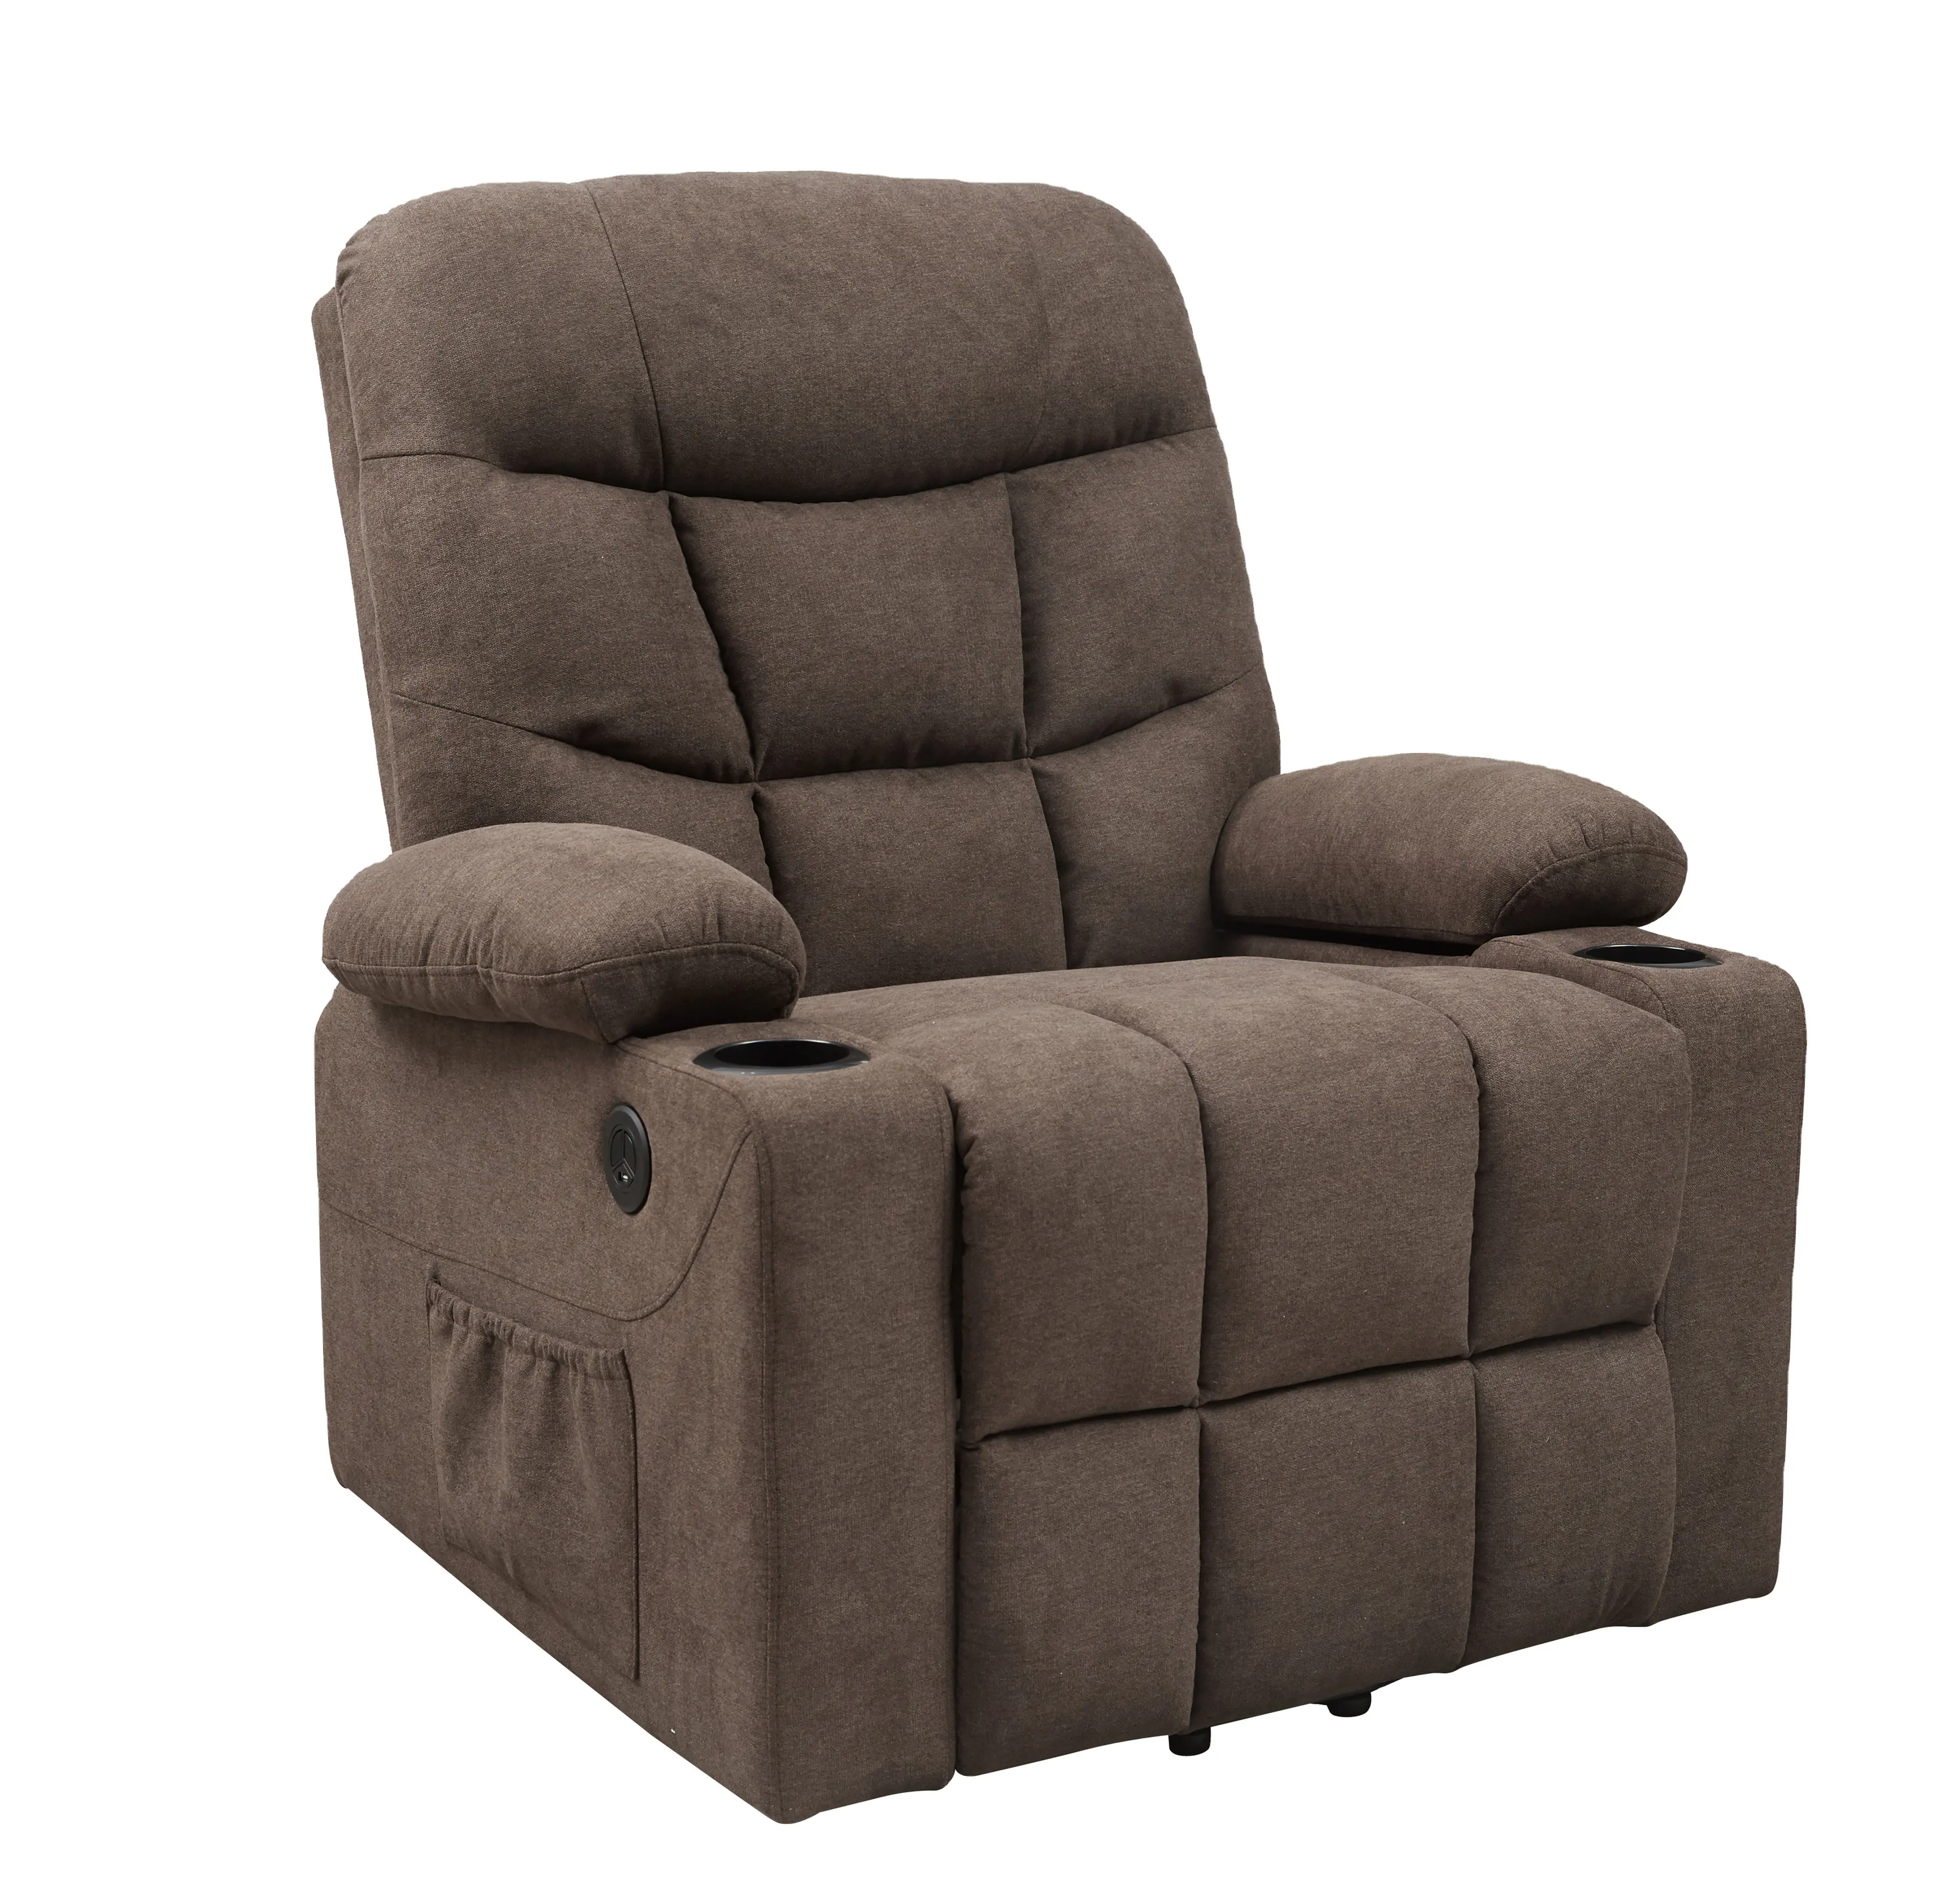 Modern multifunction living room sofas lazy single lounge fabric massage recliner chair